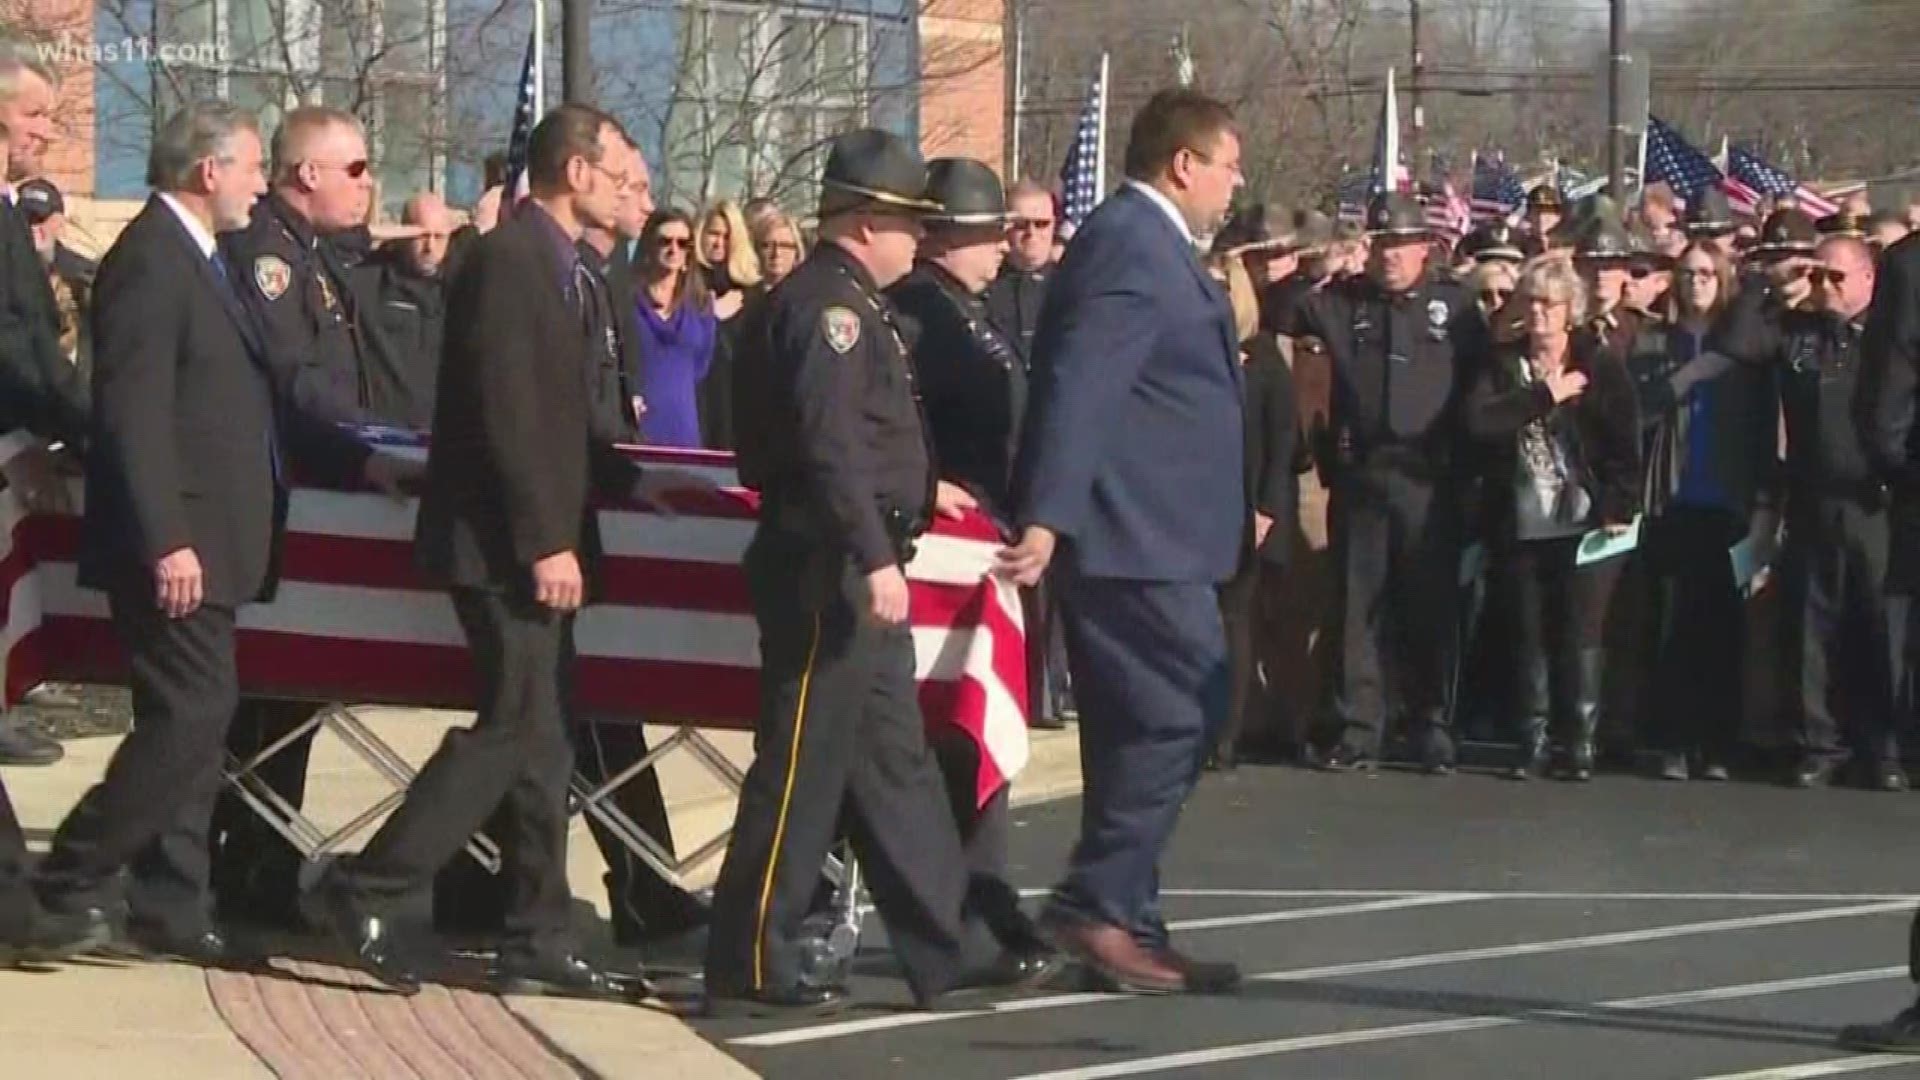 Charlestown, Indiana and people from all across the country gathered to honor a fallen officer.